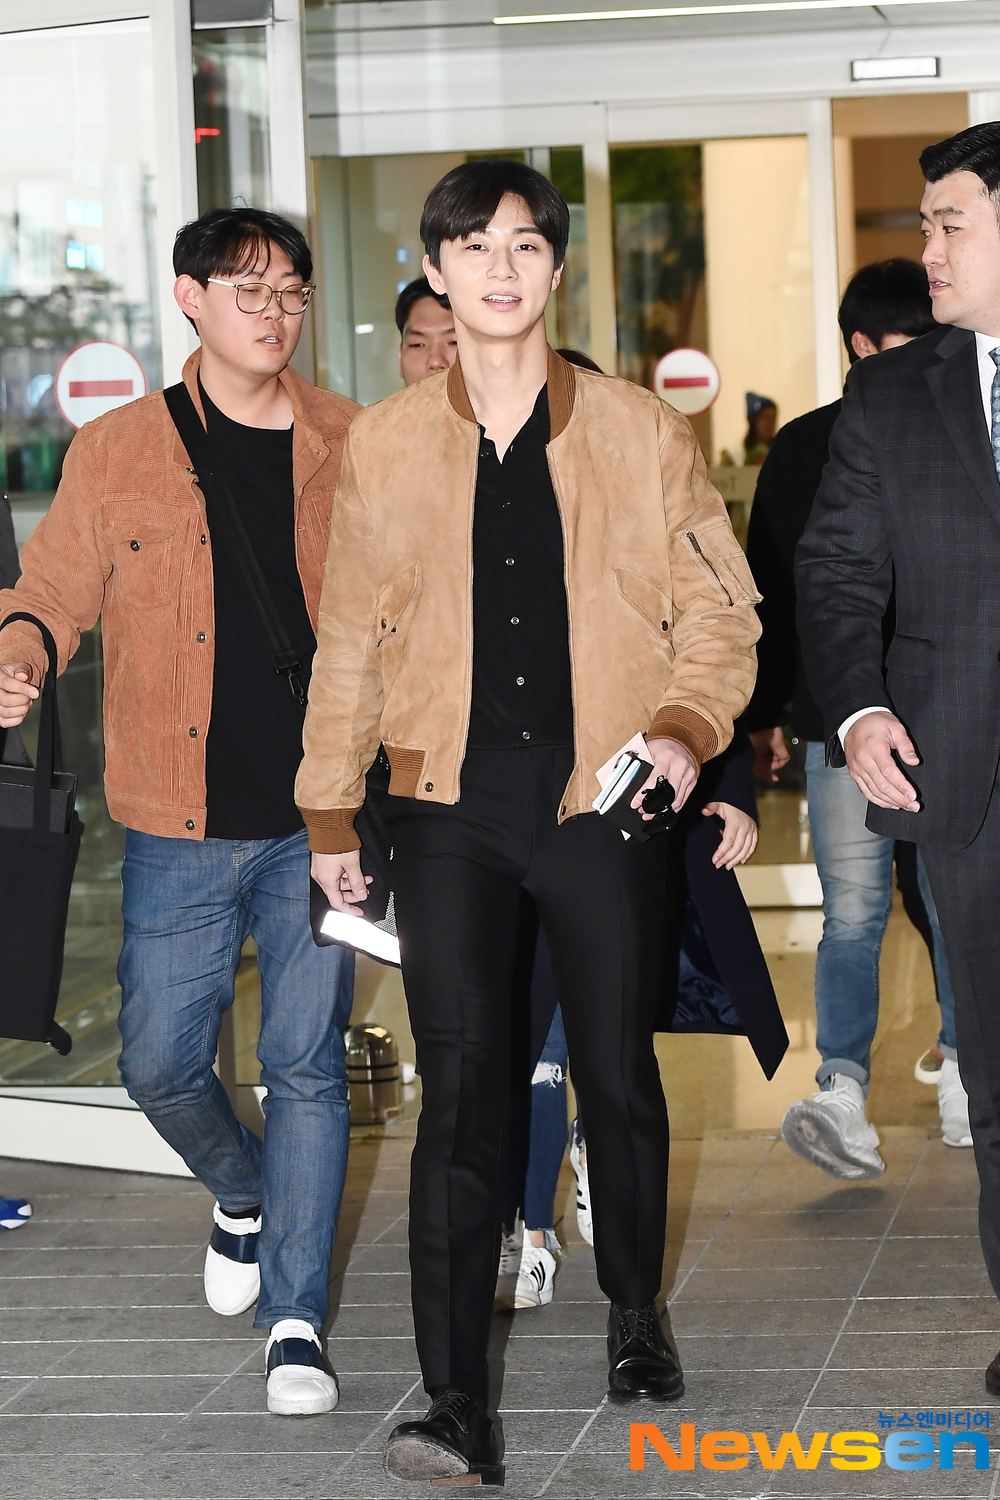 <p>Actor Park Seo-joon(Park Seo-joon)3 18 PM Incheon Jung-operation in Incheon International Airport via the Hong Kong Open at the 13th annual Asian Film Awards (Asian Film Awards , 2019 : AFA) Academy Awards schedule and entry.</p>